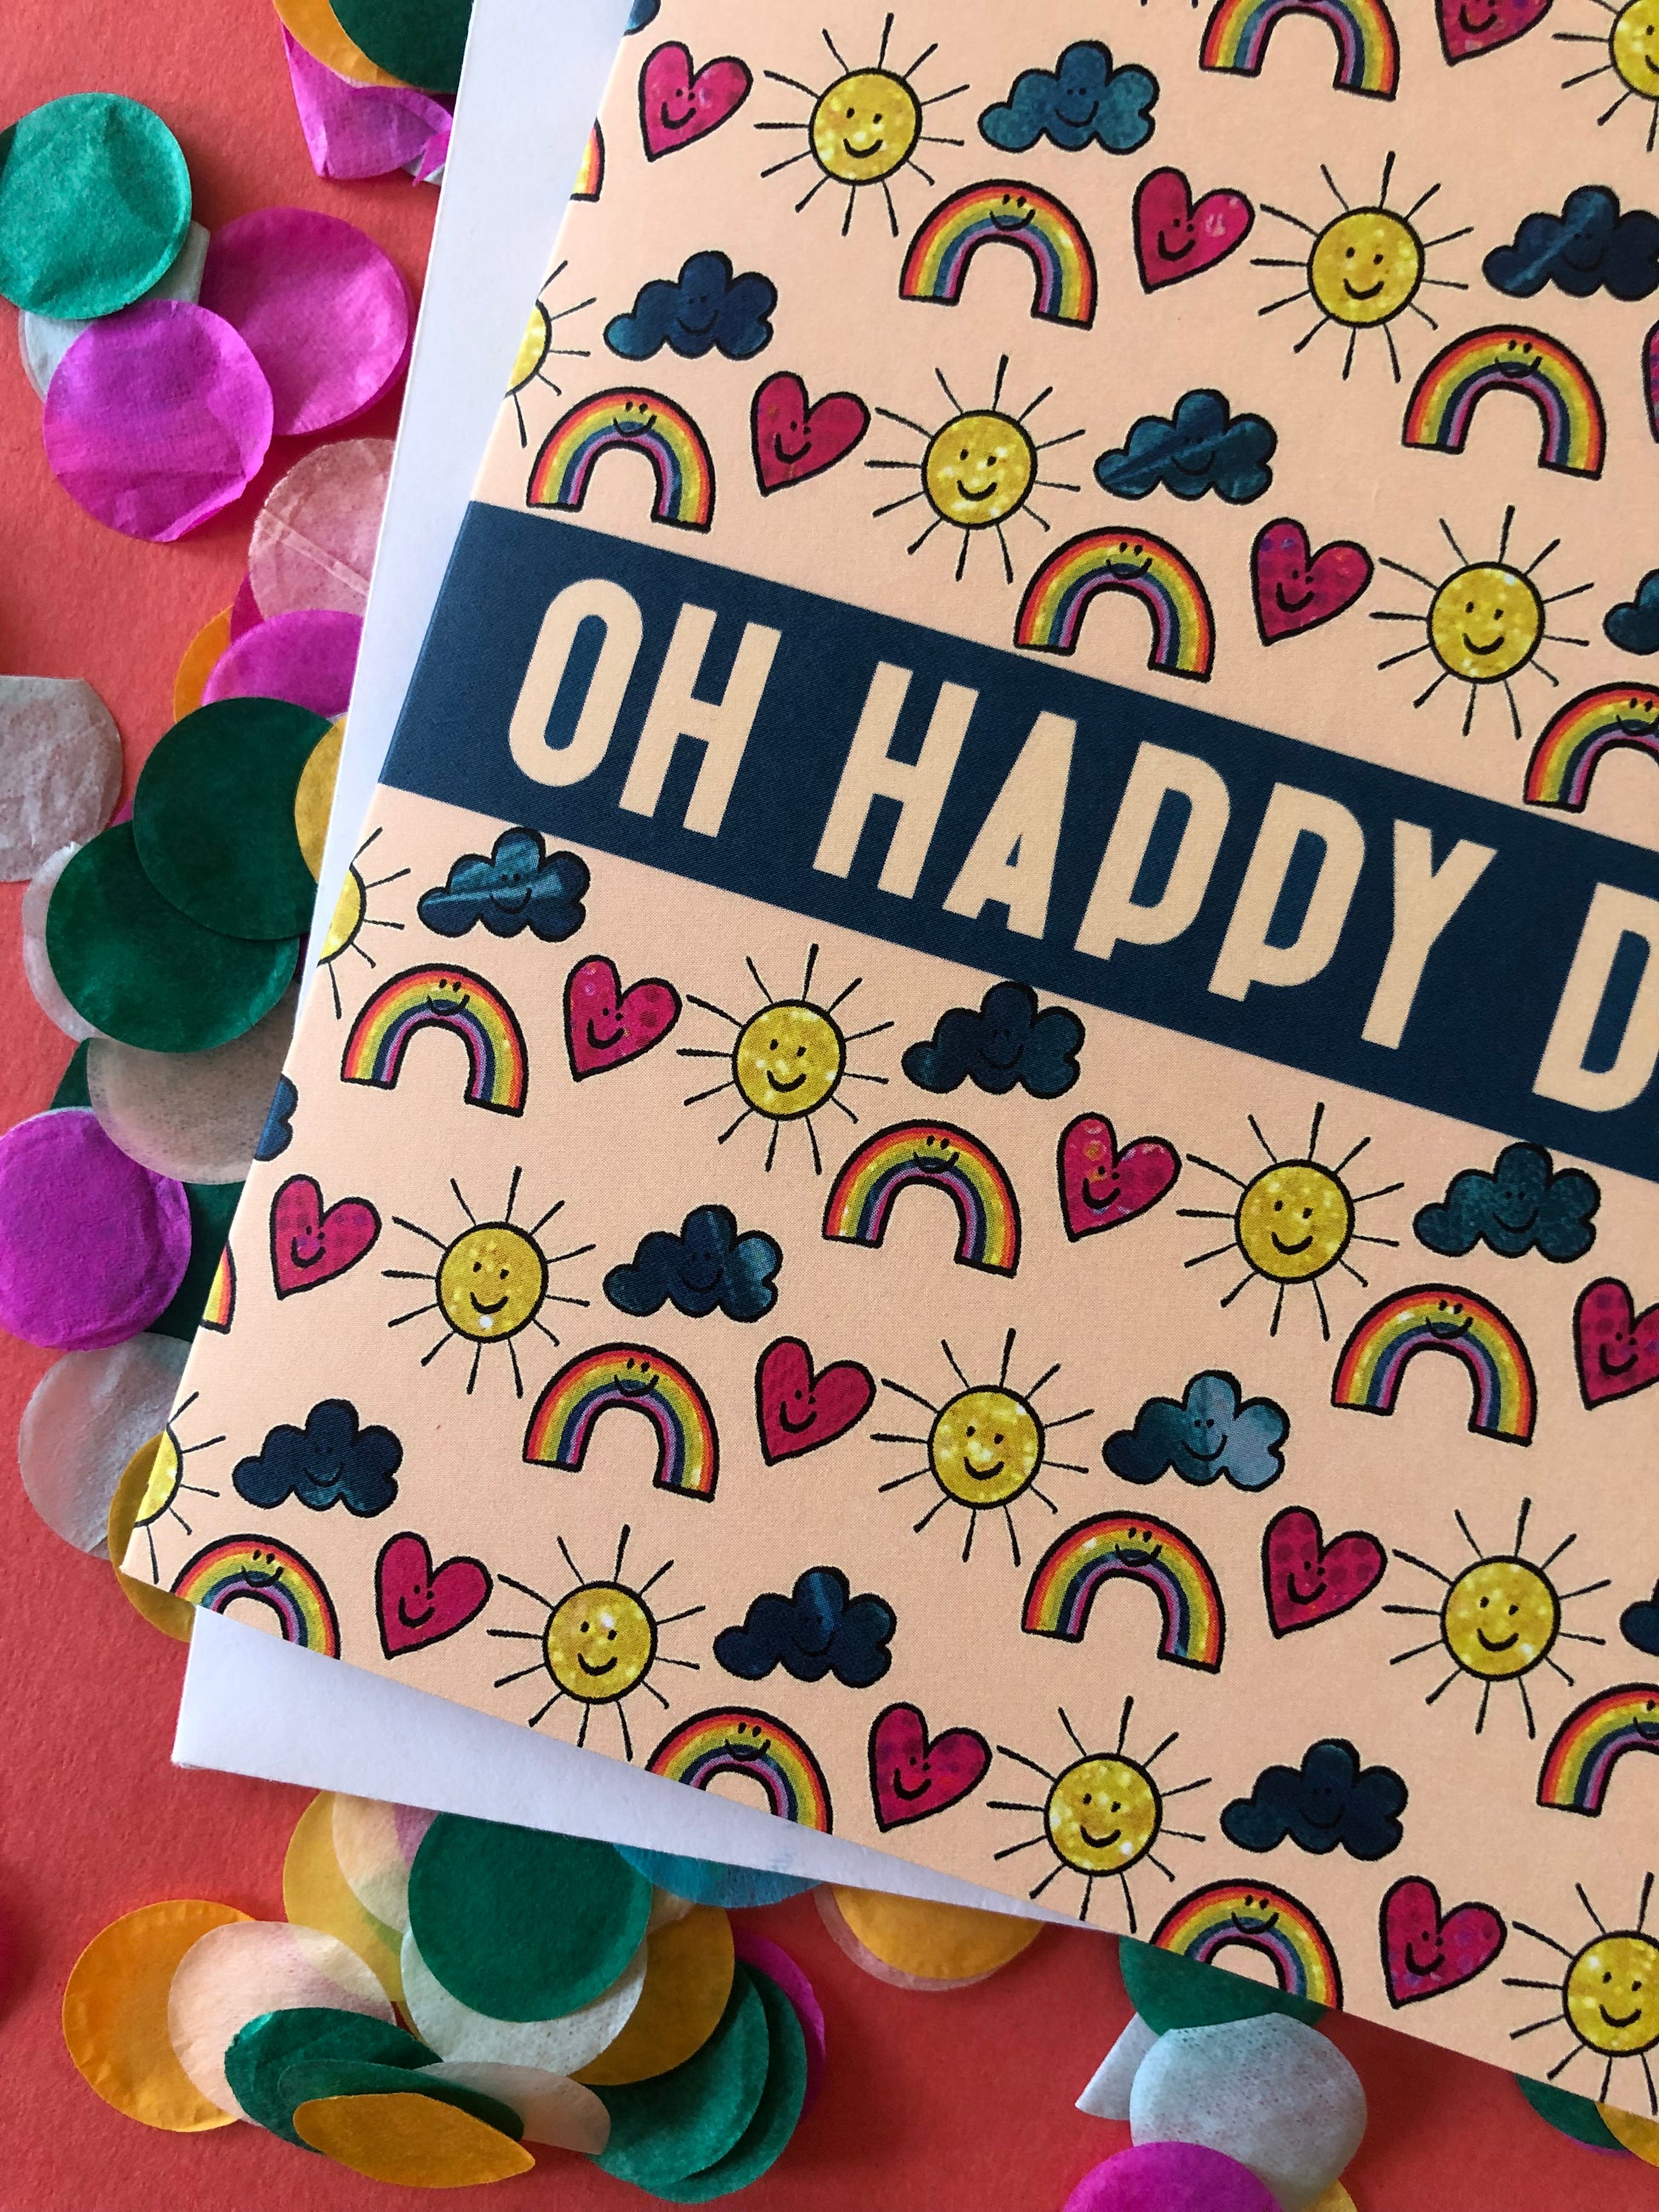 Everyday greetings card that says 'oh happy day' and features a fun pattern of suns, clouds and rainbows